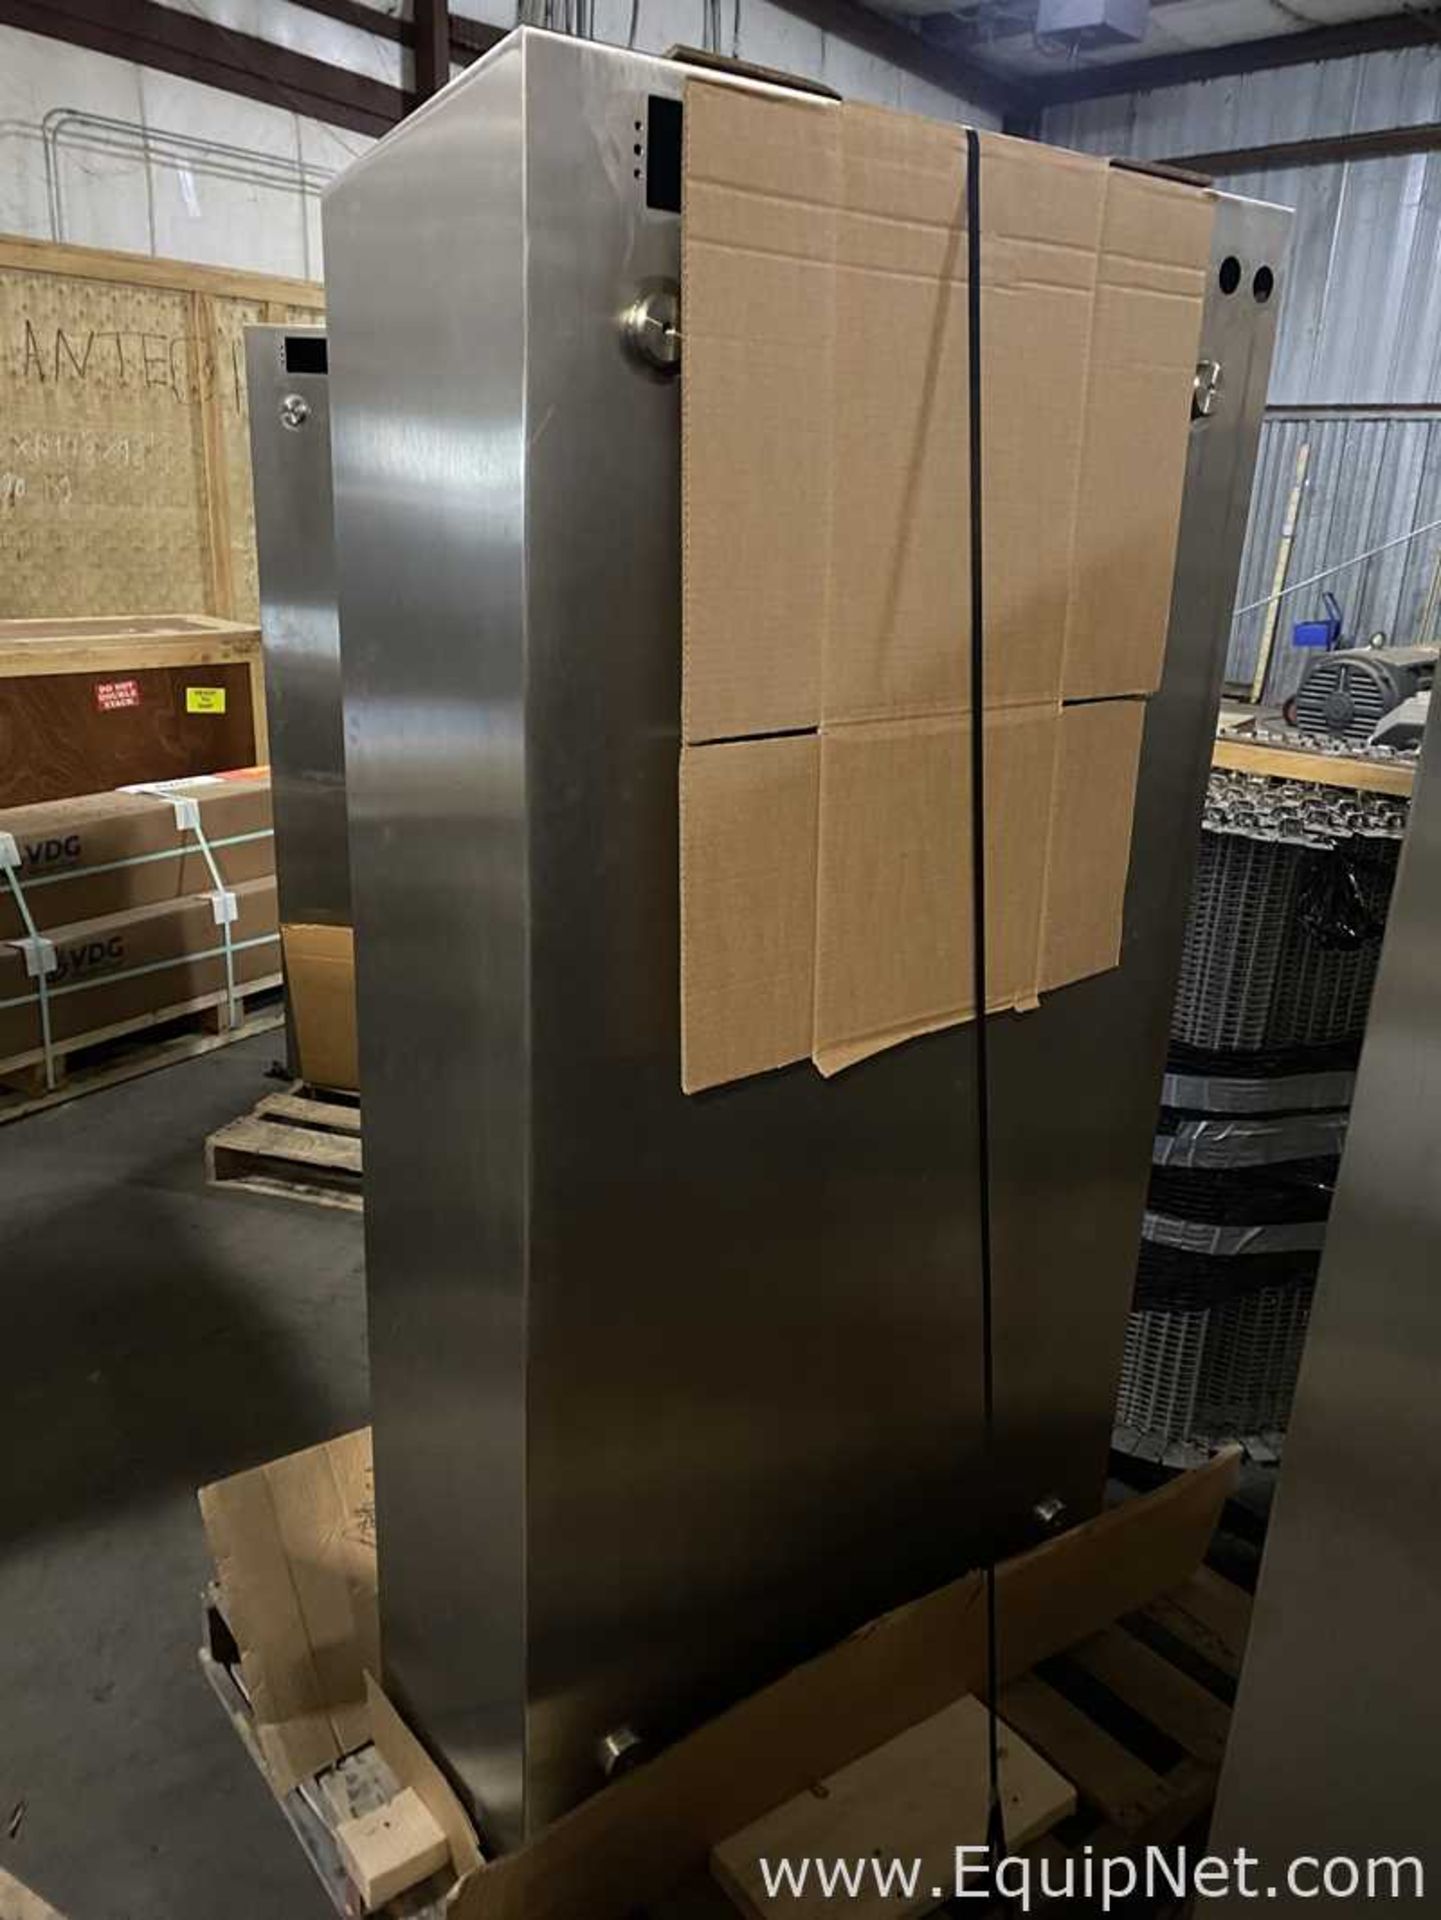 Unused Stainless Steel Electrical Cabinet - Image 3 of 3